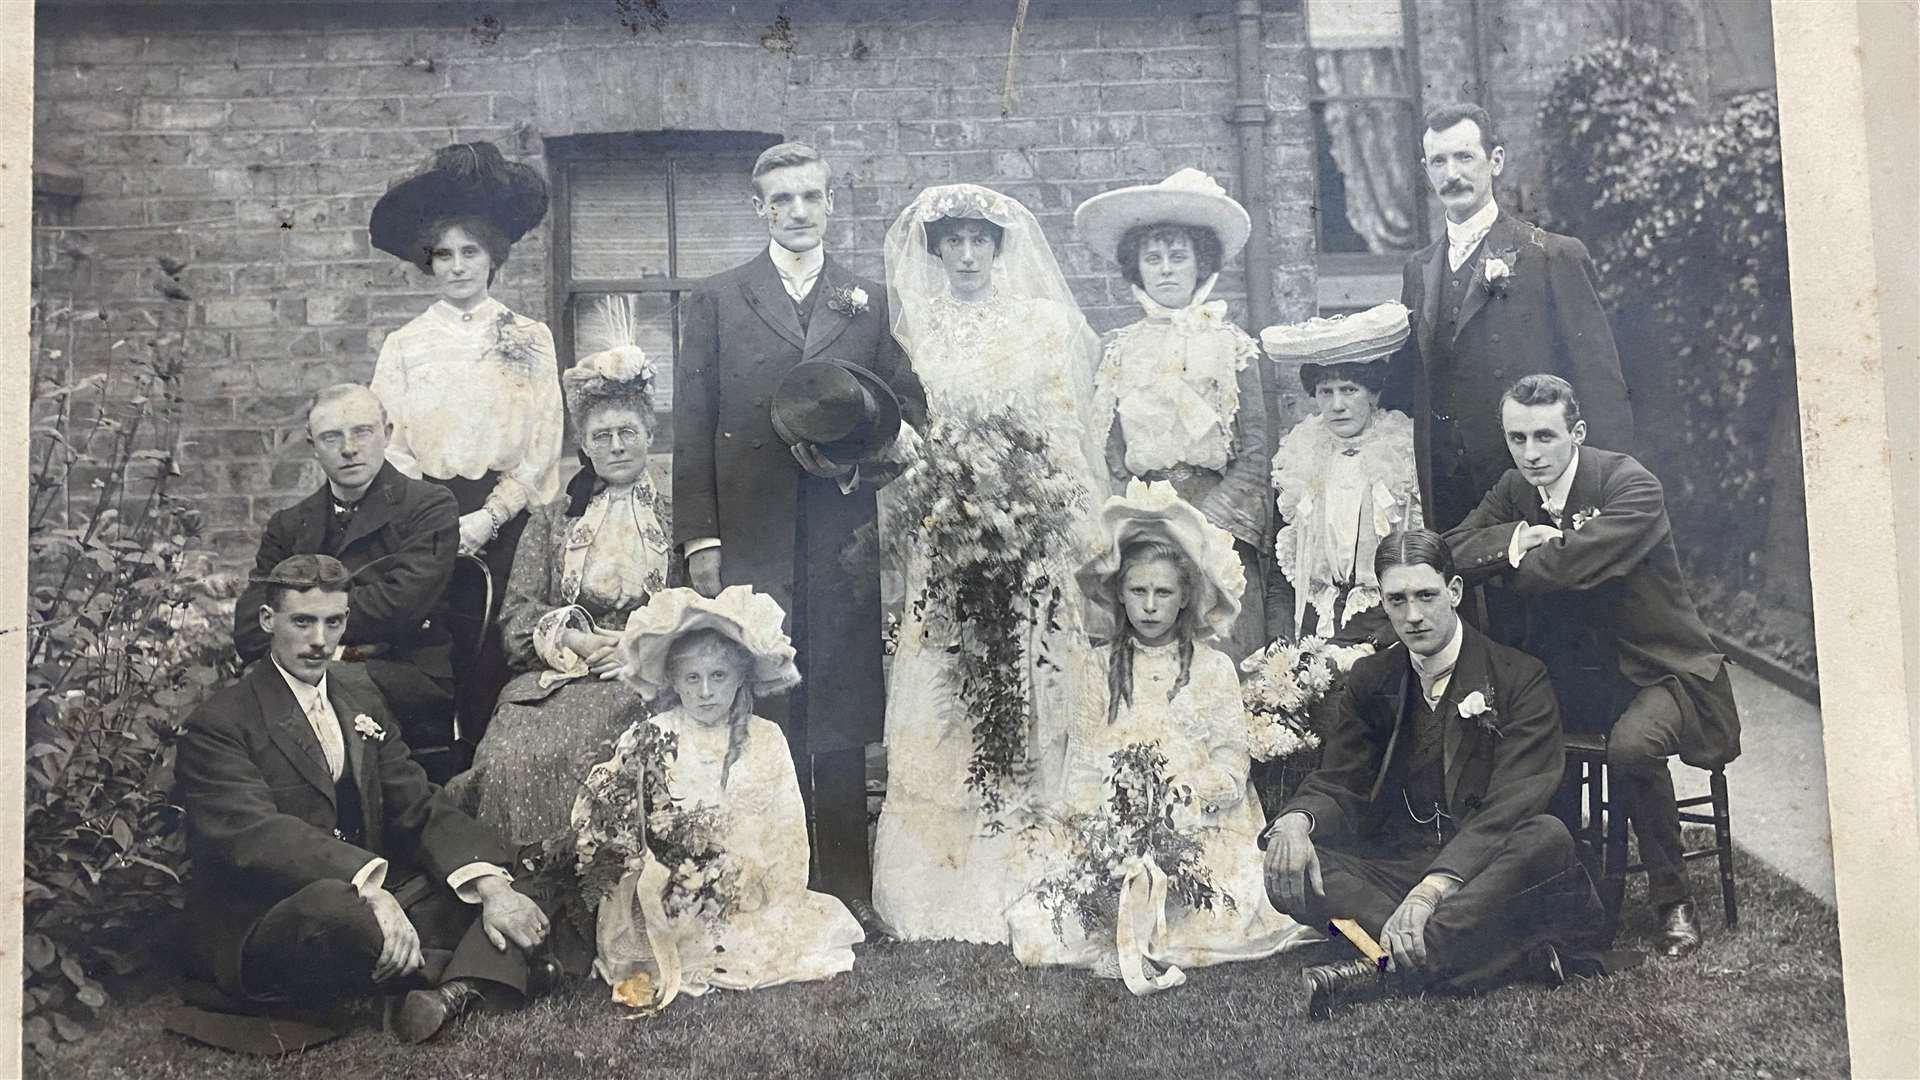 This old family photo was found among Mary Stephenson’s belongings.